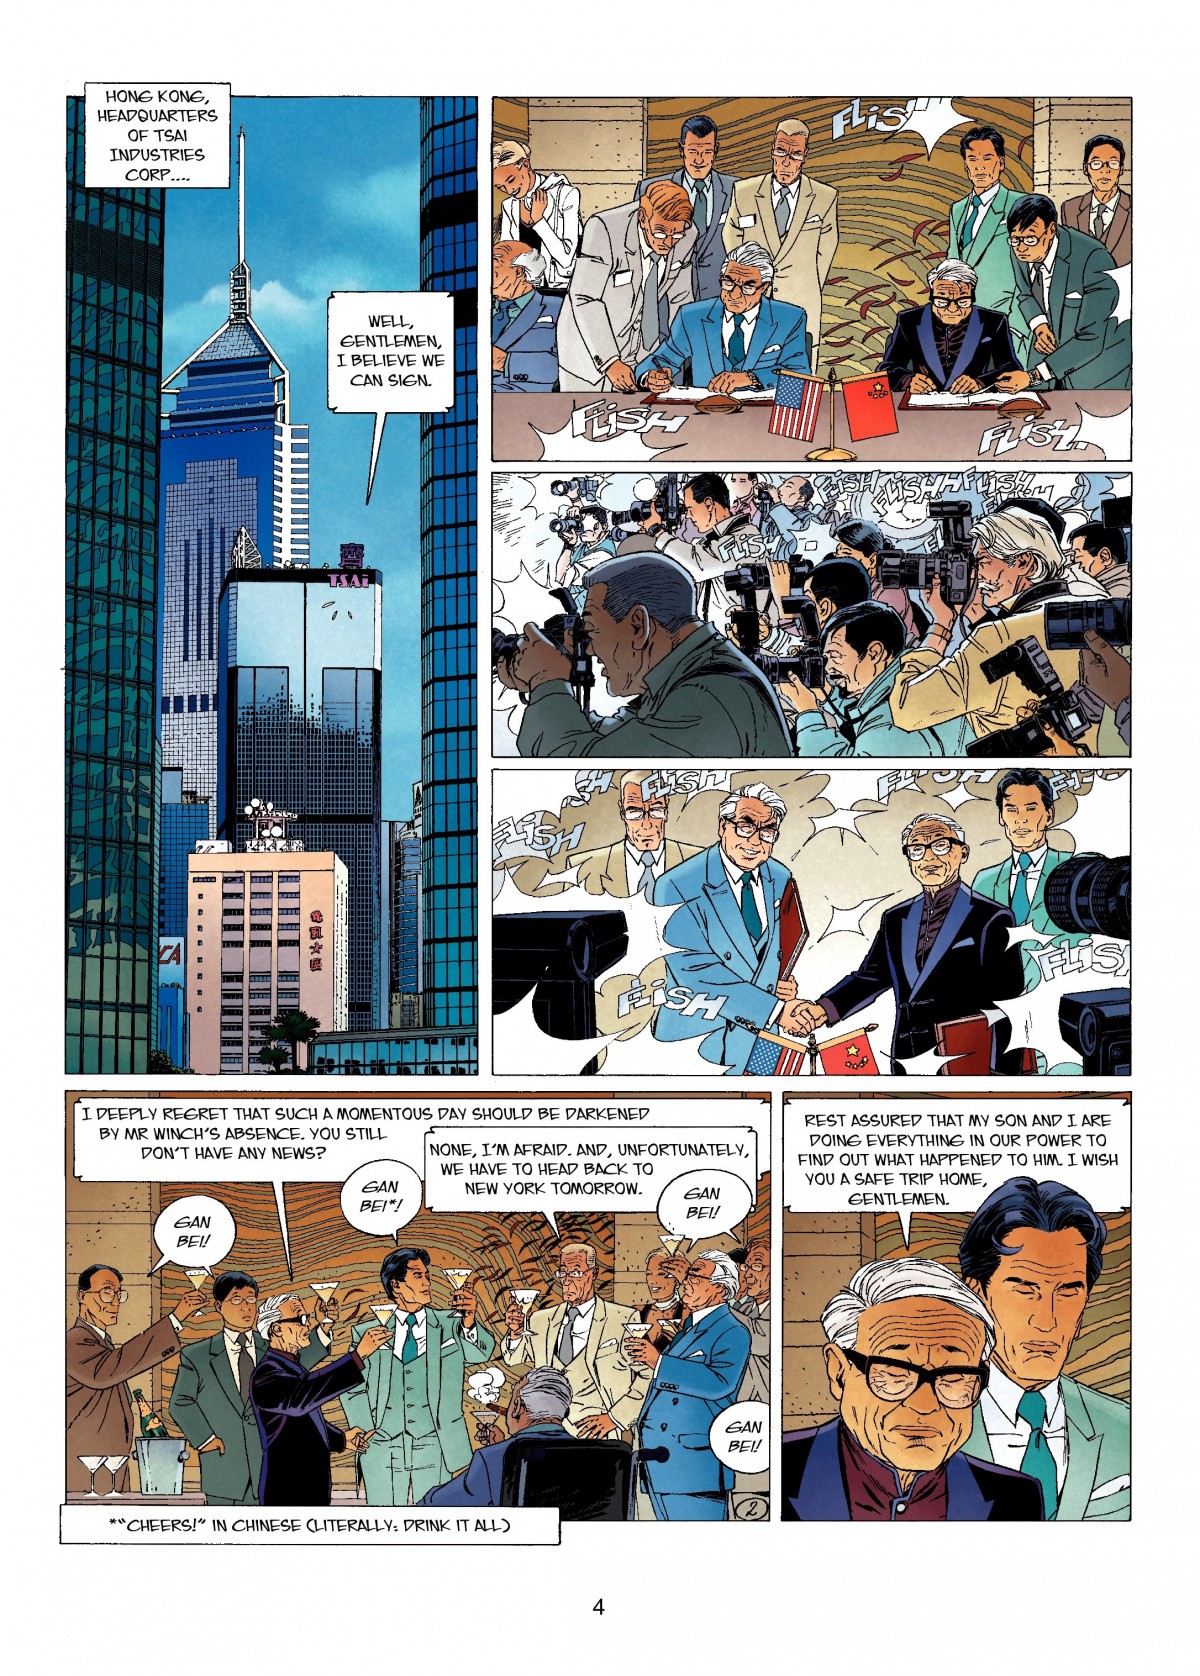 Largo Winch (1990-): Chapter 12 - Page 4